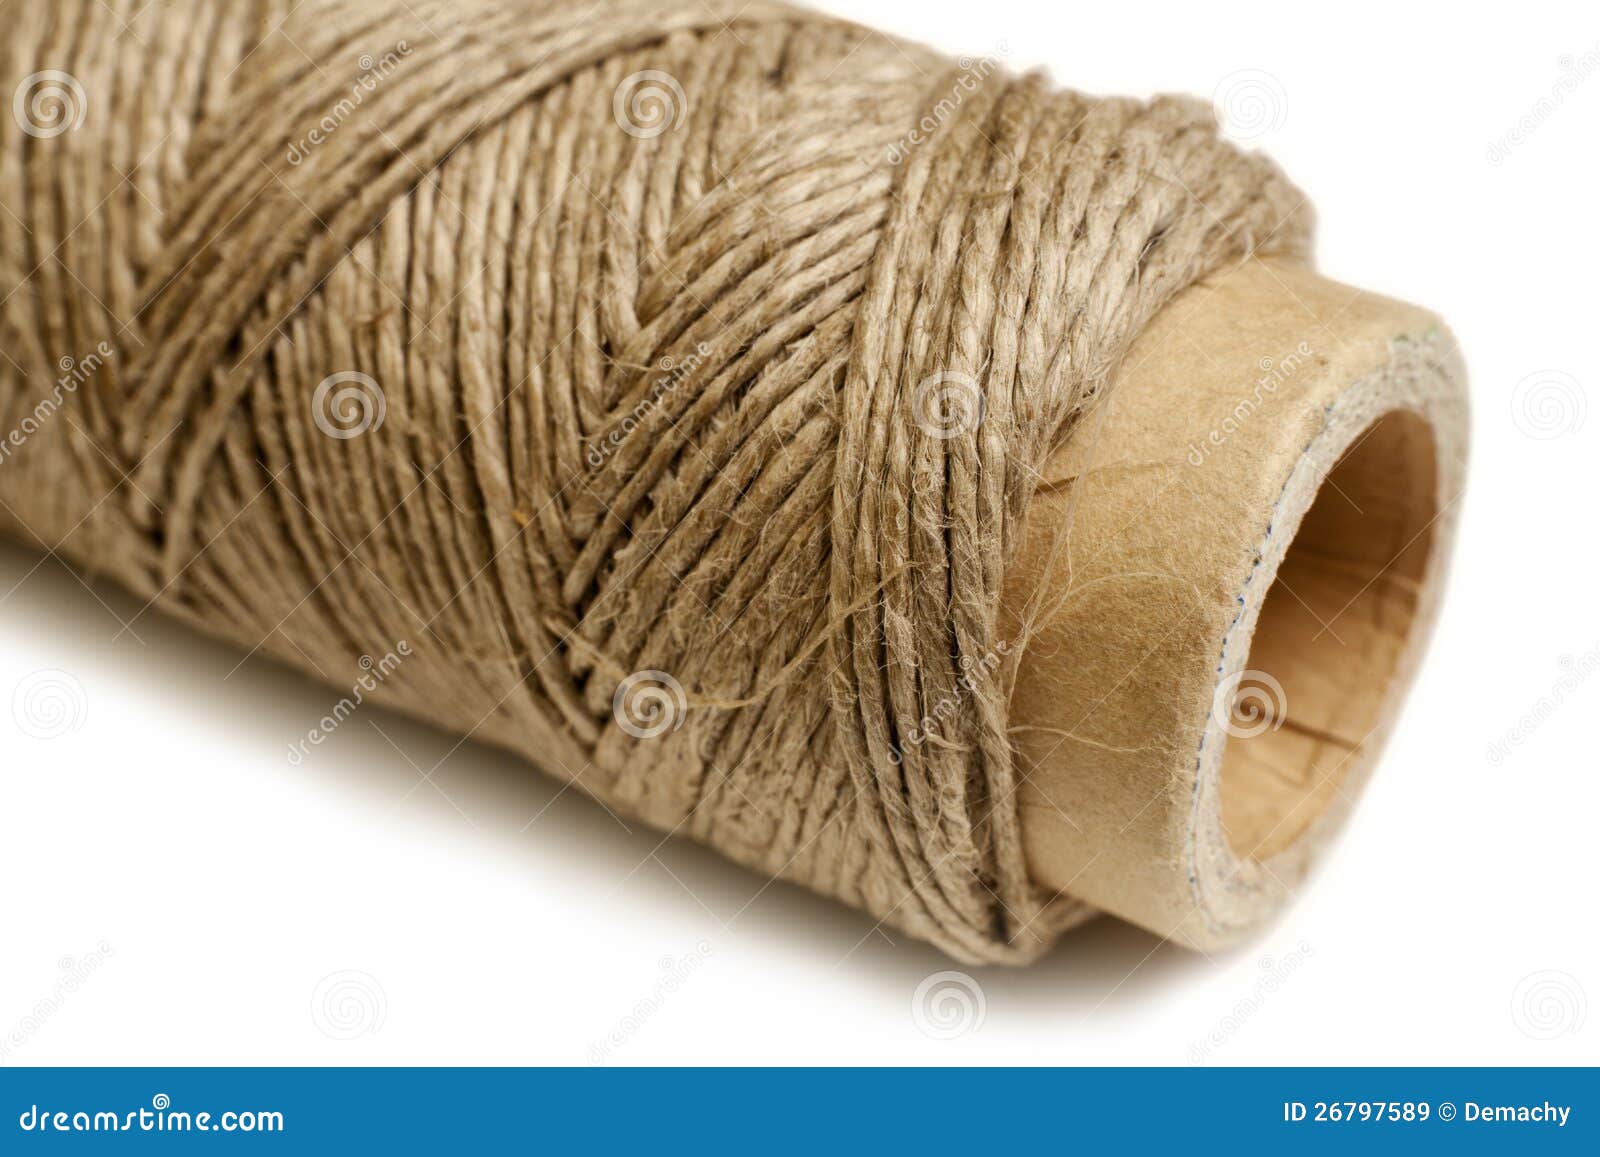 Thick Strong Jute Rope and Twine Spool on White Stock Image